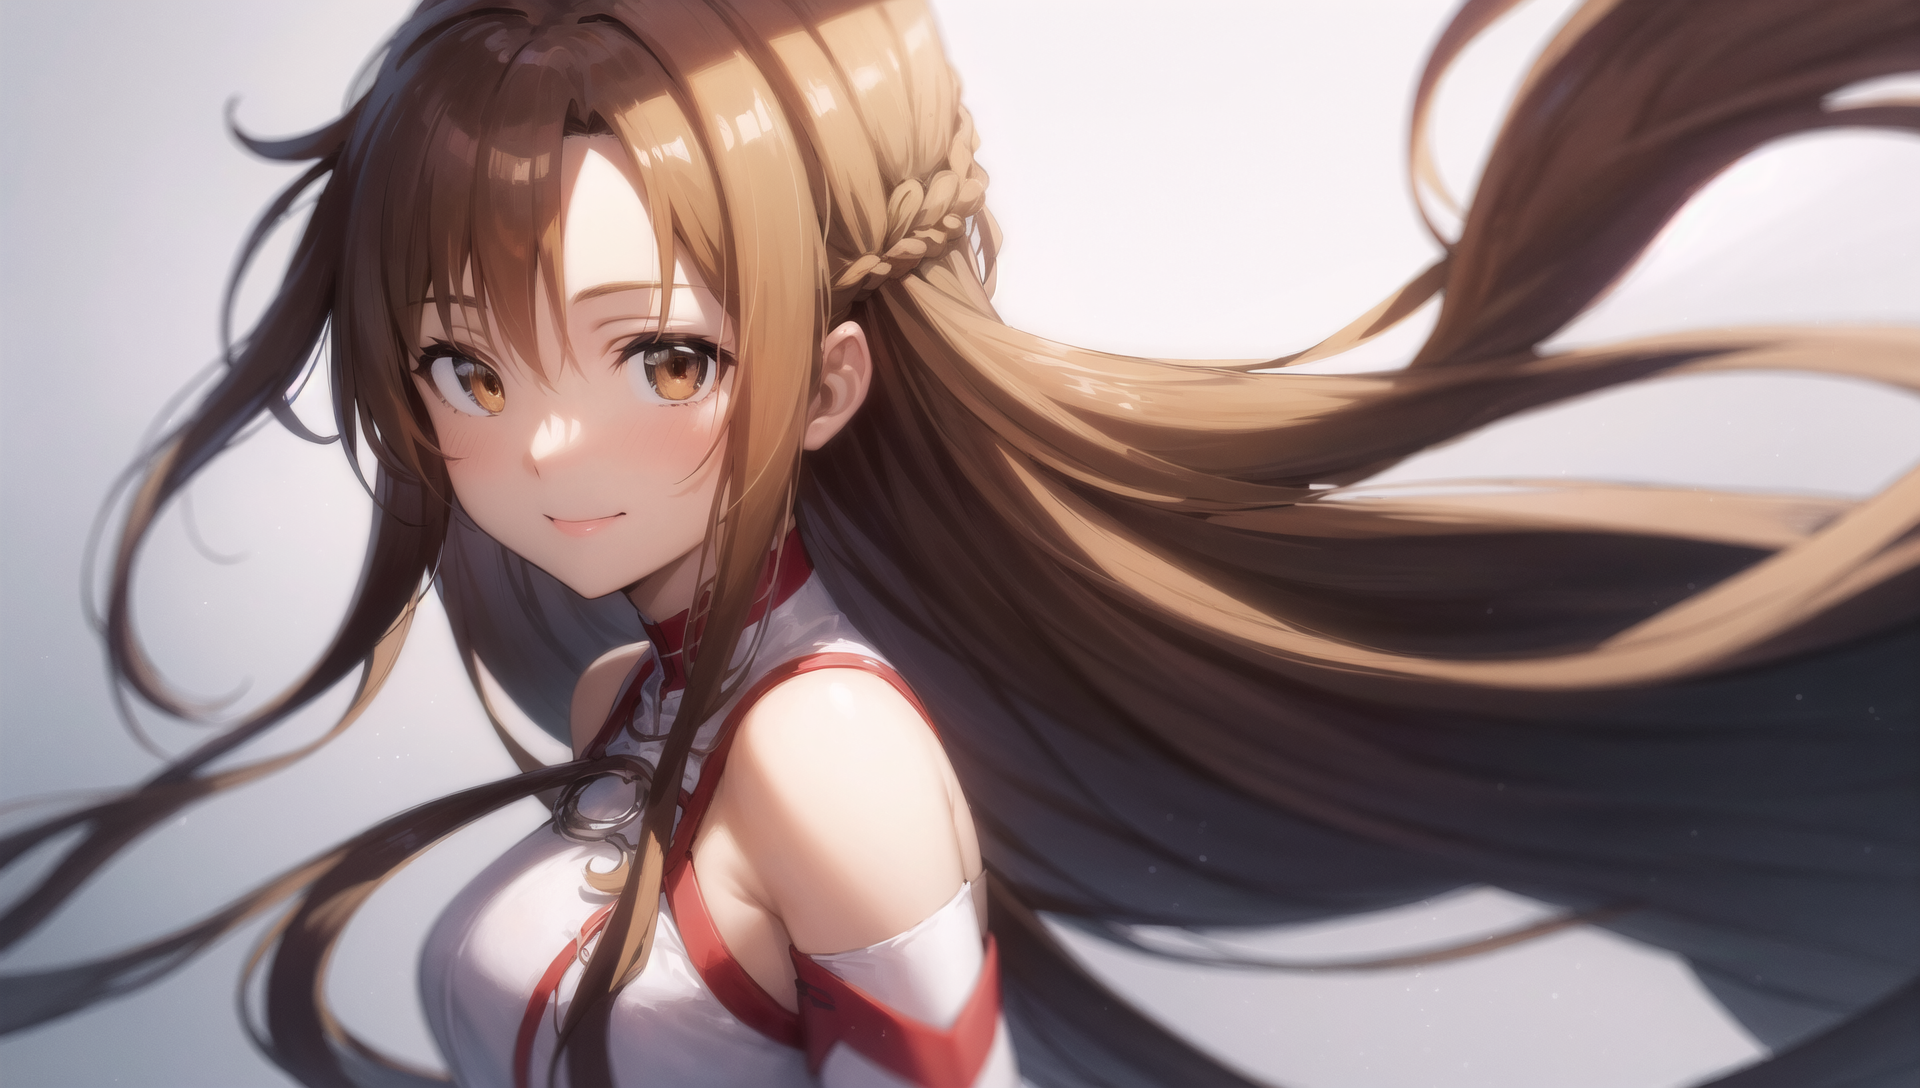 Asuna Yuuki from Sword Art Online - a captivating HD desktop wallpaper featuring the beloved Anime character in a stunning background.